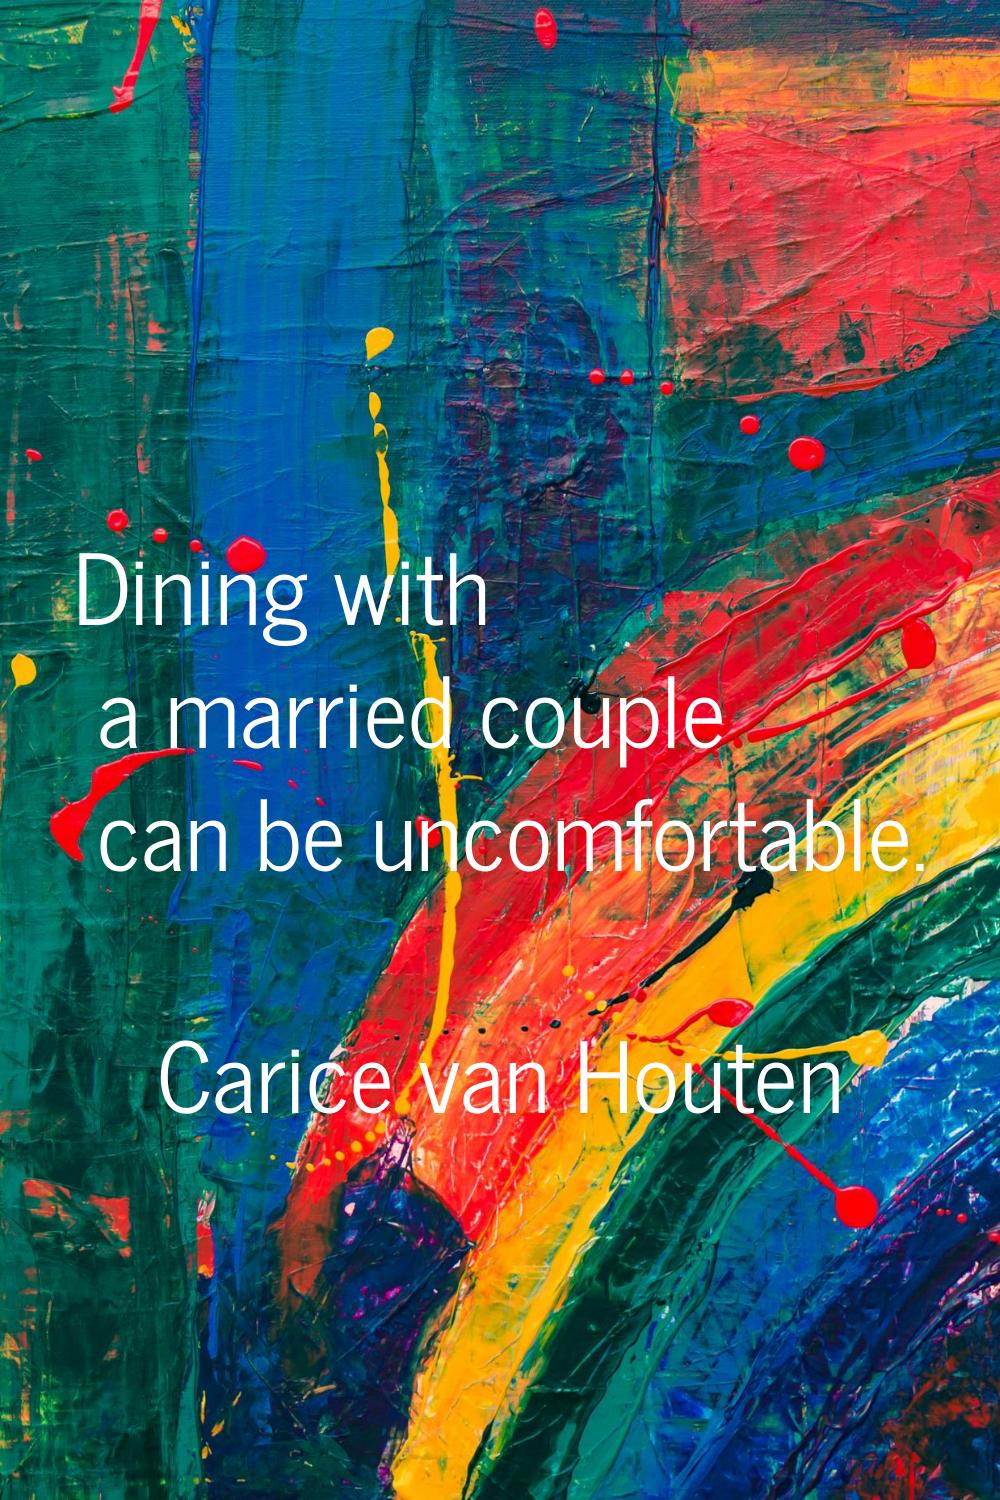 Dining with a married couple can be uncomfortable.